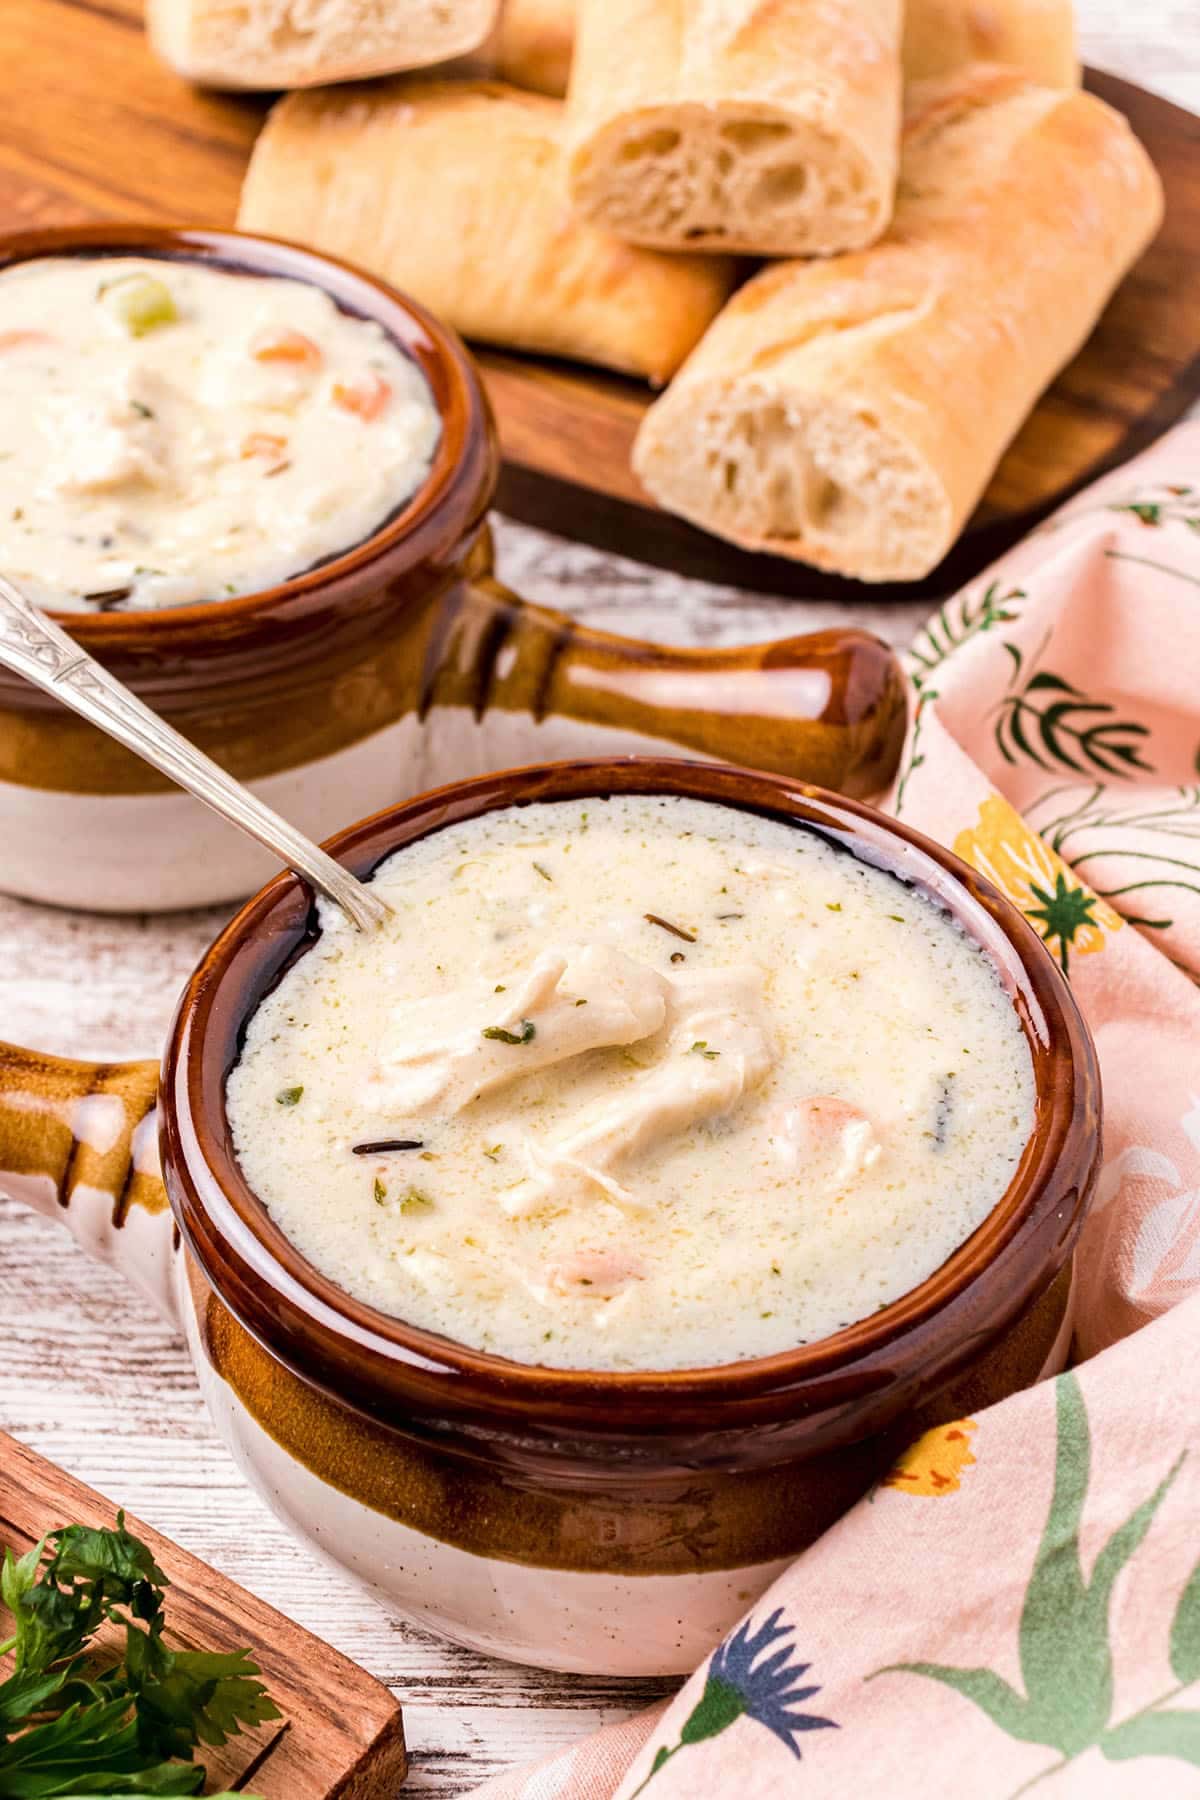 Creamy Chicken and Wild Rice Soup - Pound Dropper